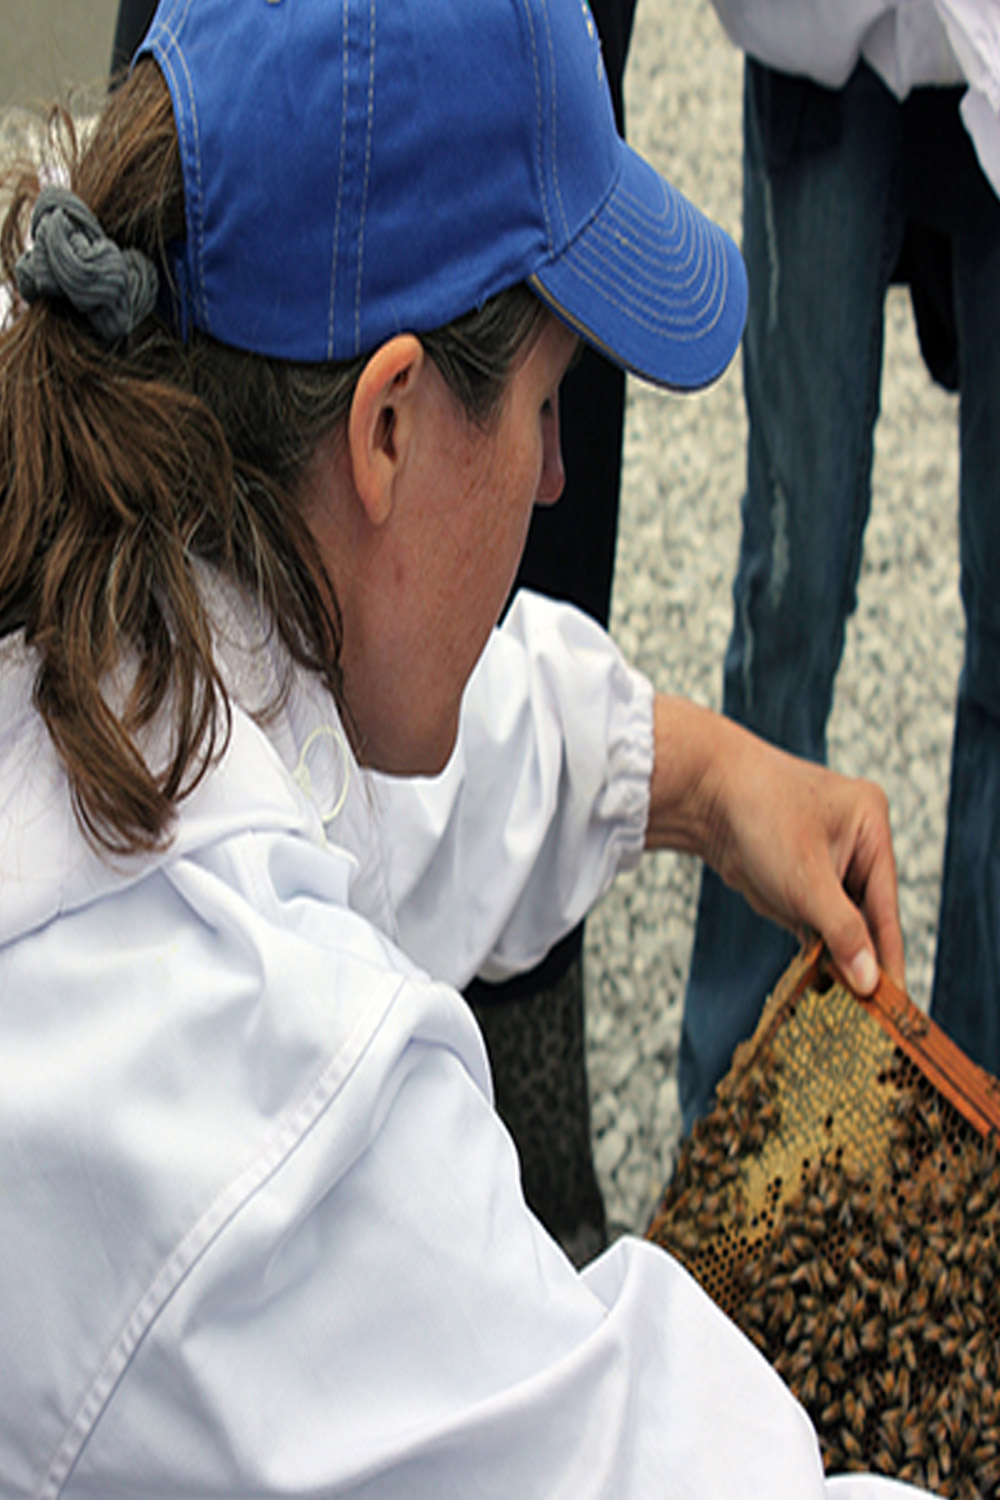 State Apiarist Tammy Horn examing honey produced on a reclaimed mine site